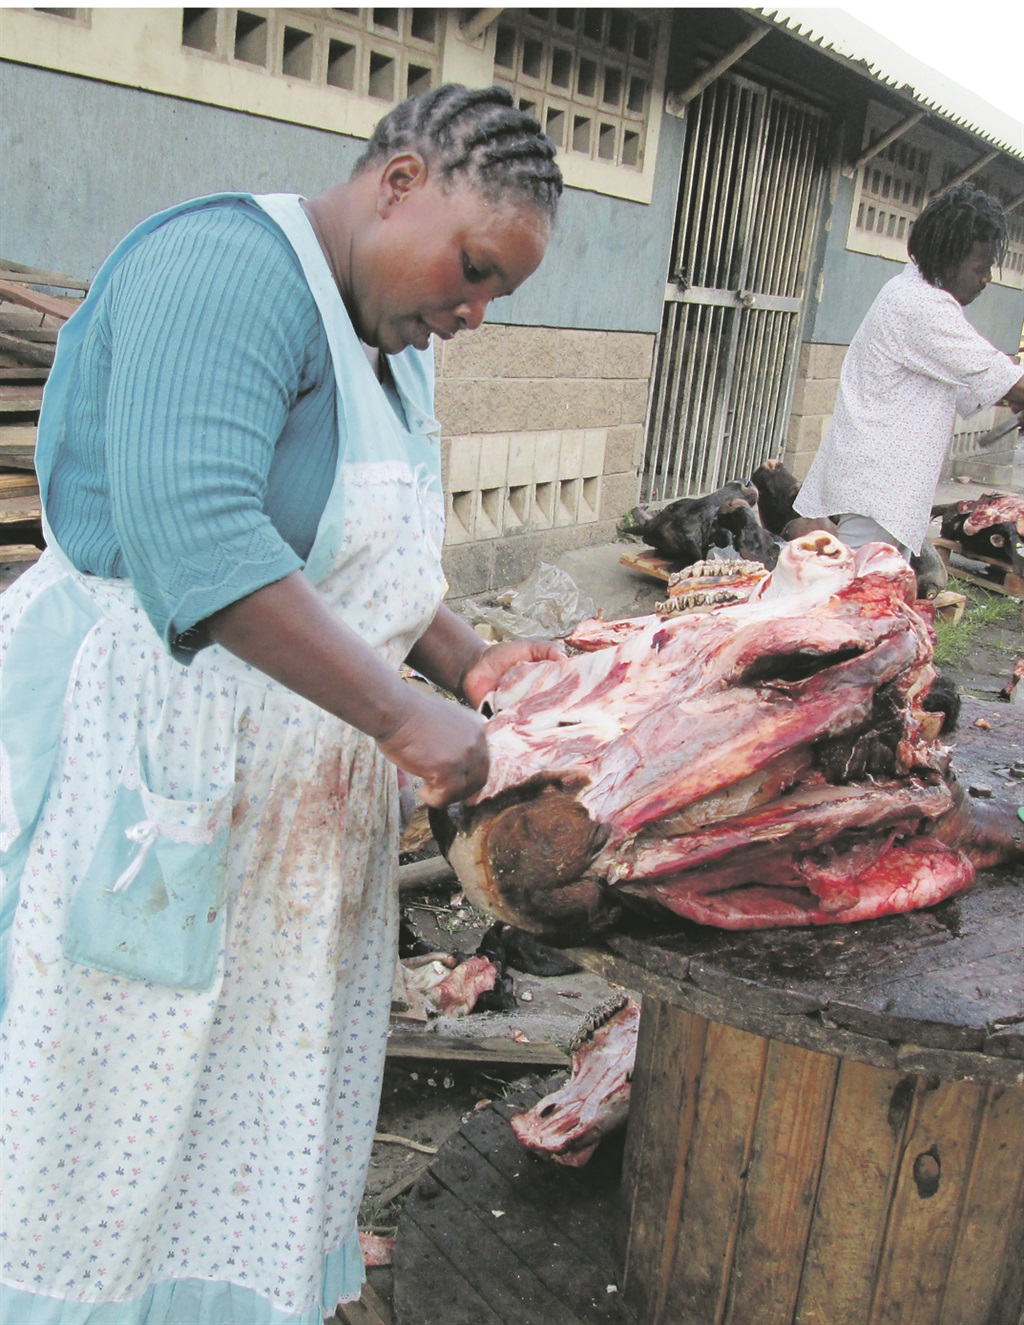 Thuleleni Dladla uses her skills to clean cows’ heads.Photo by Mbali Dlungwana